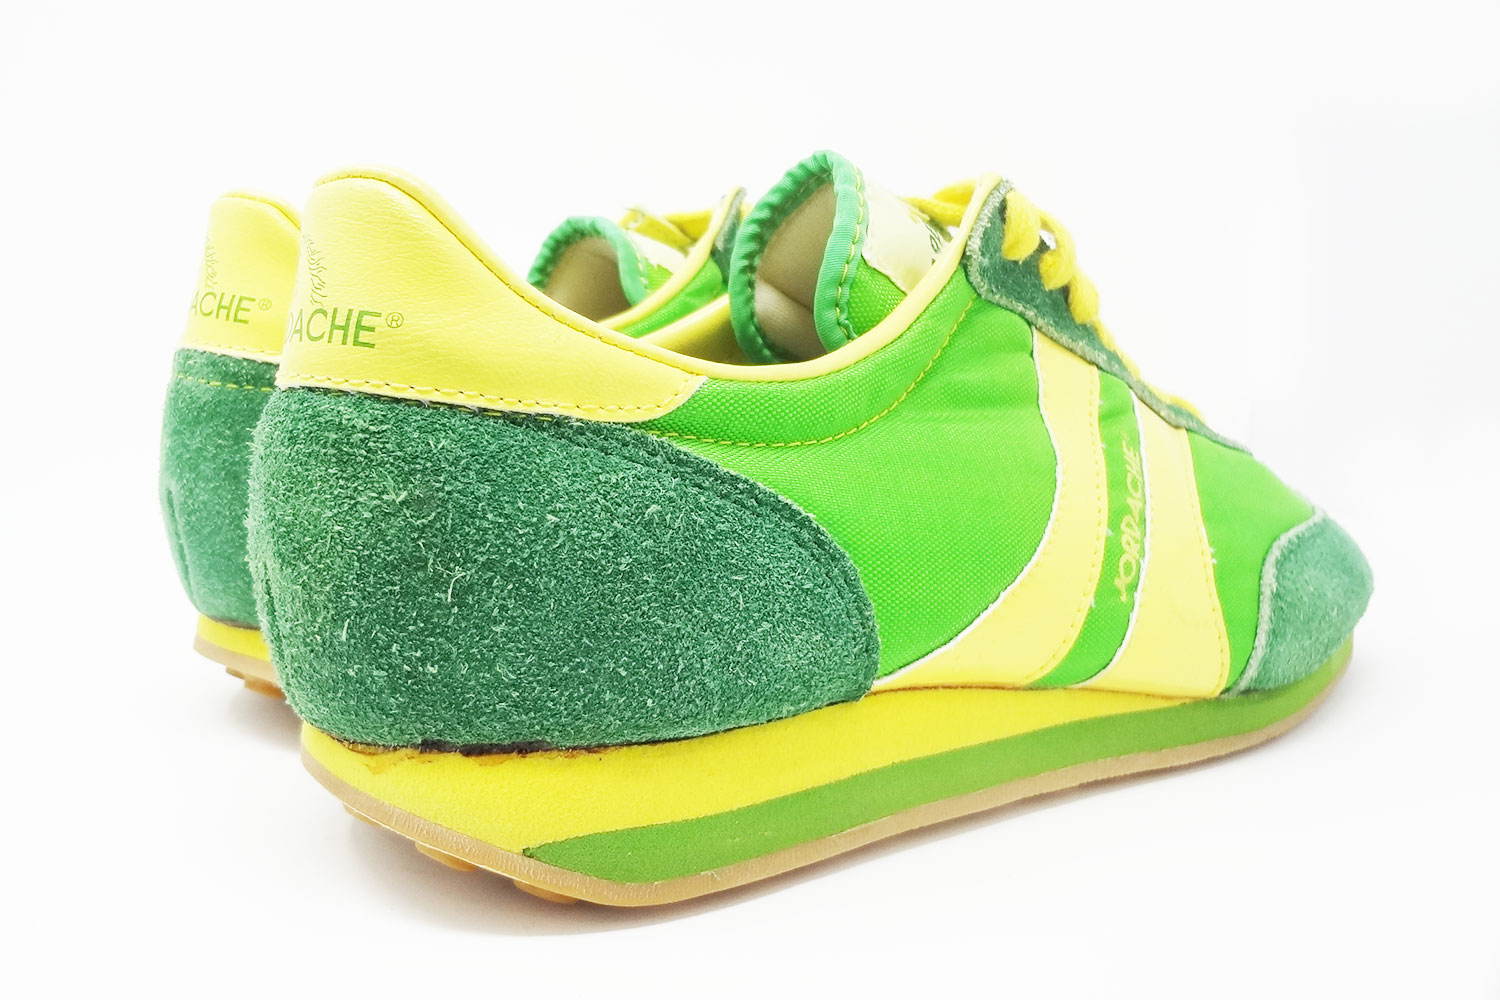 Obscure Jordache green and yellow vintage sneakers @ The Deffest